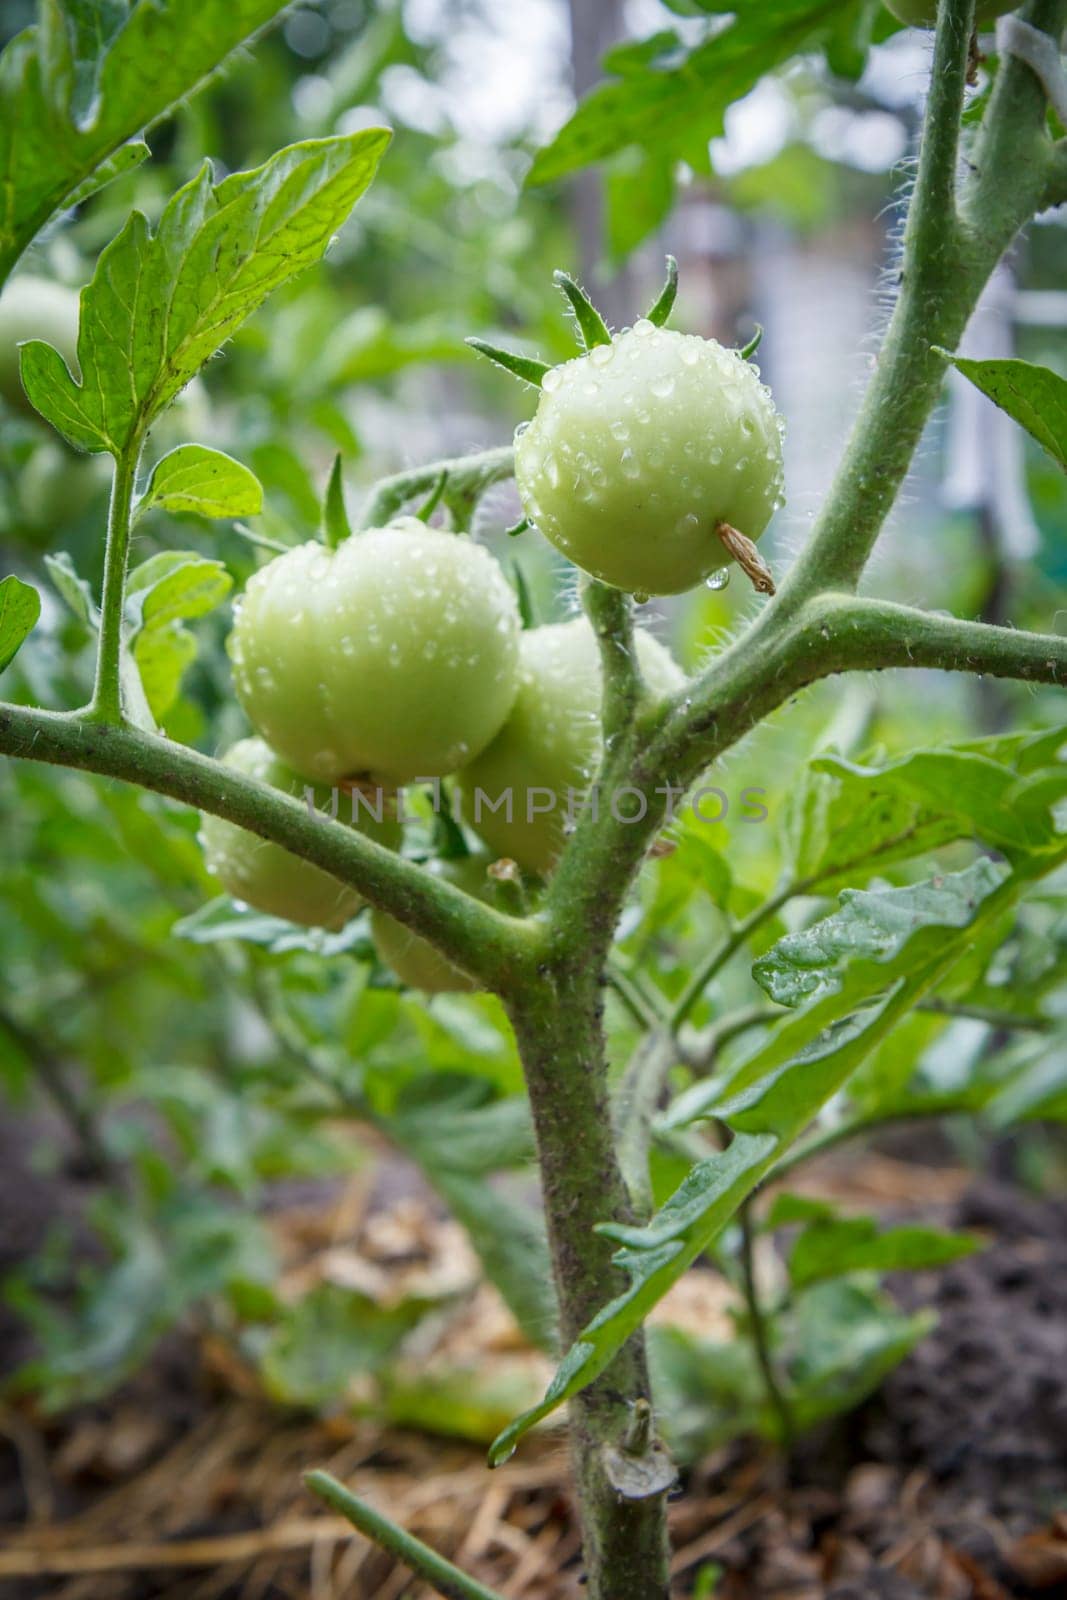 Unripe green tomatoes growing on bush in the garden. Cultivation of tomatoes in a greenhouse.